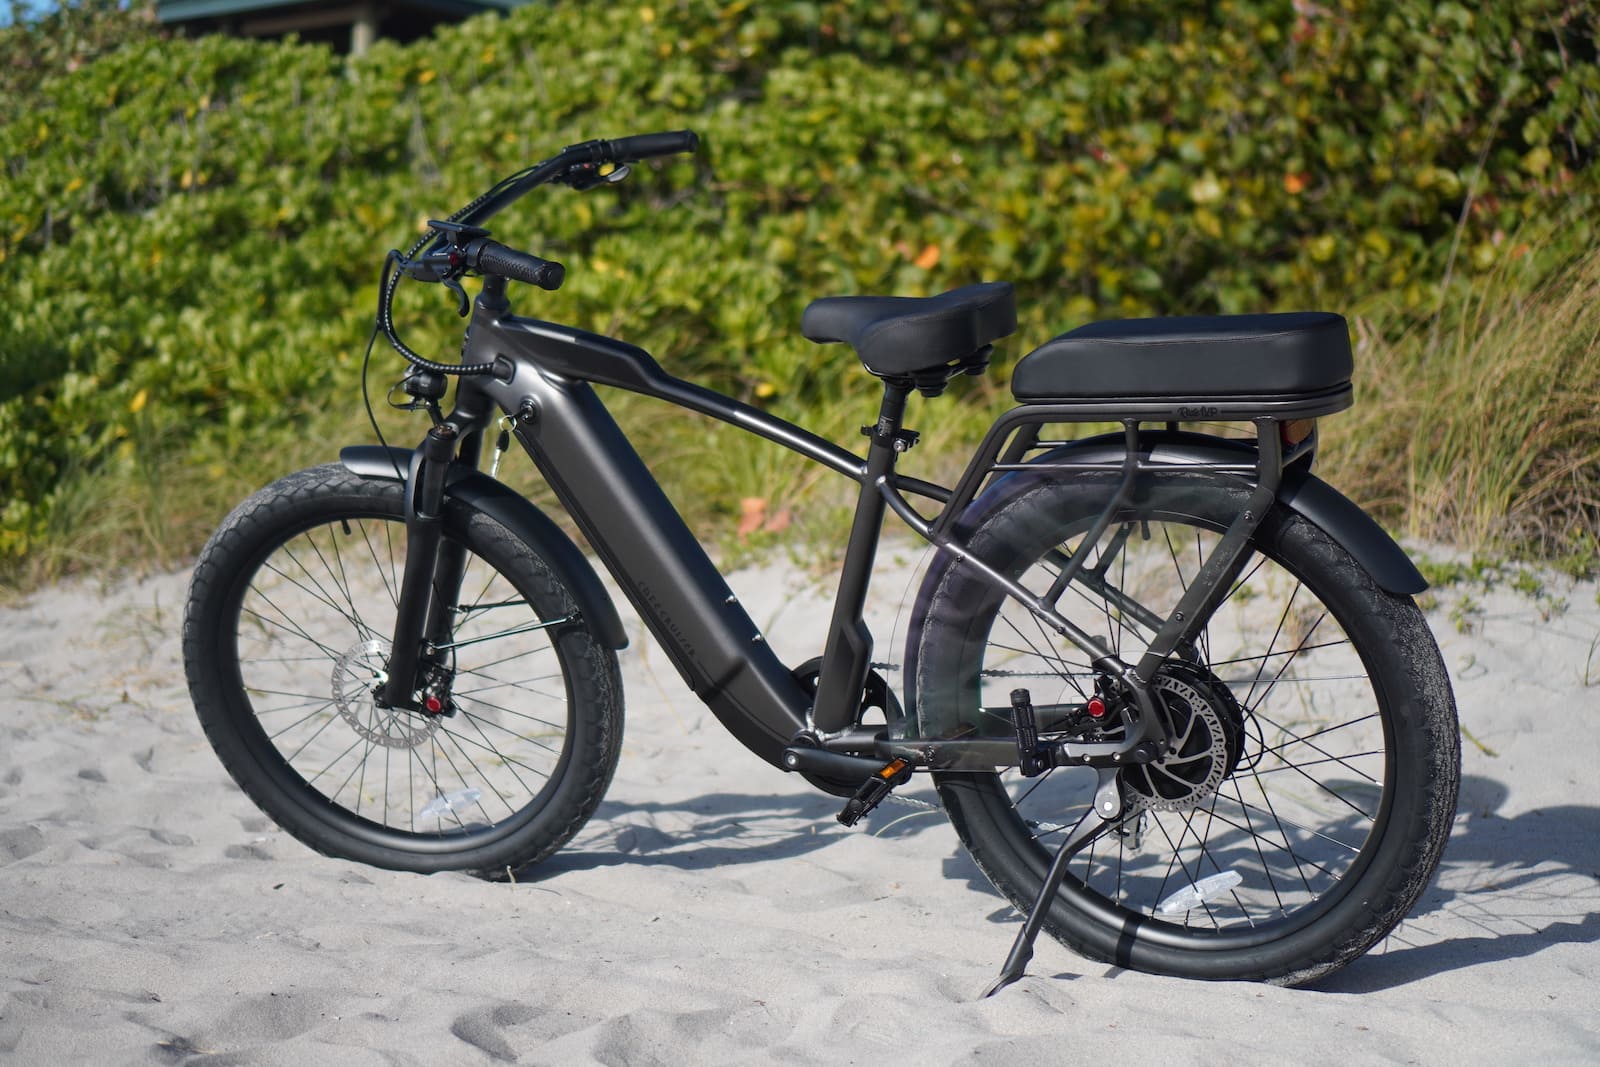 ride1up cafe cruiser electric bike review 12 - Auto Recent